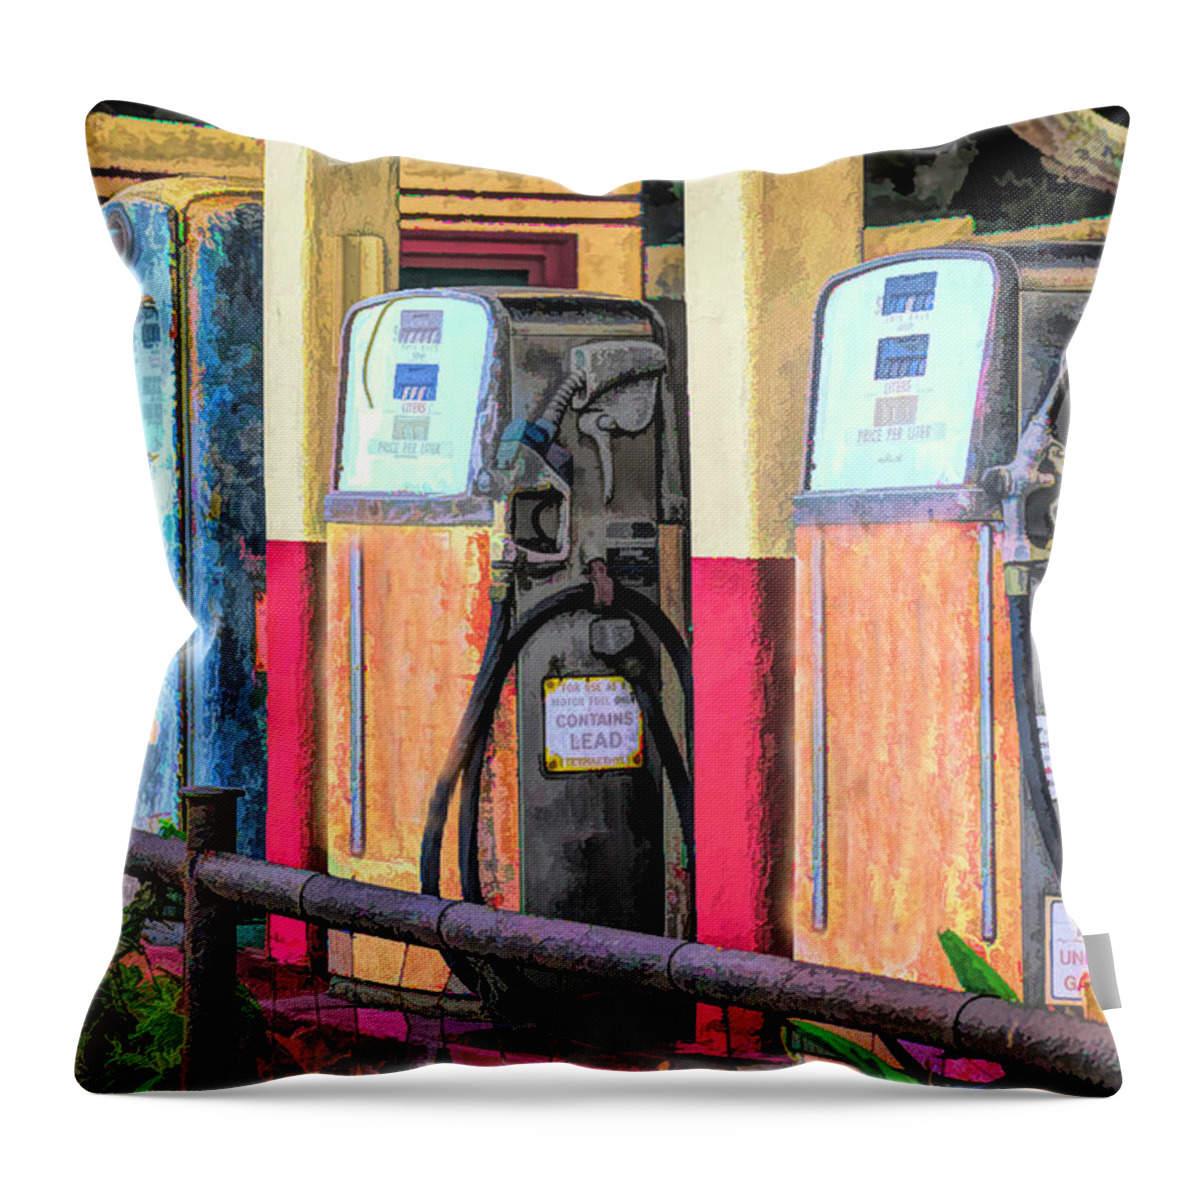 Abstract Gas Pumps Los Alamos California Throw Pillow featuring the photograph Antique Gas Pumps at The Station by Barbara Snyder